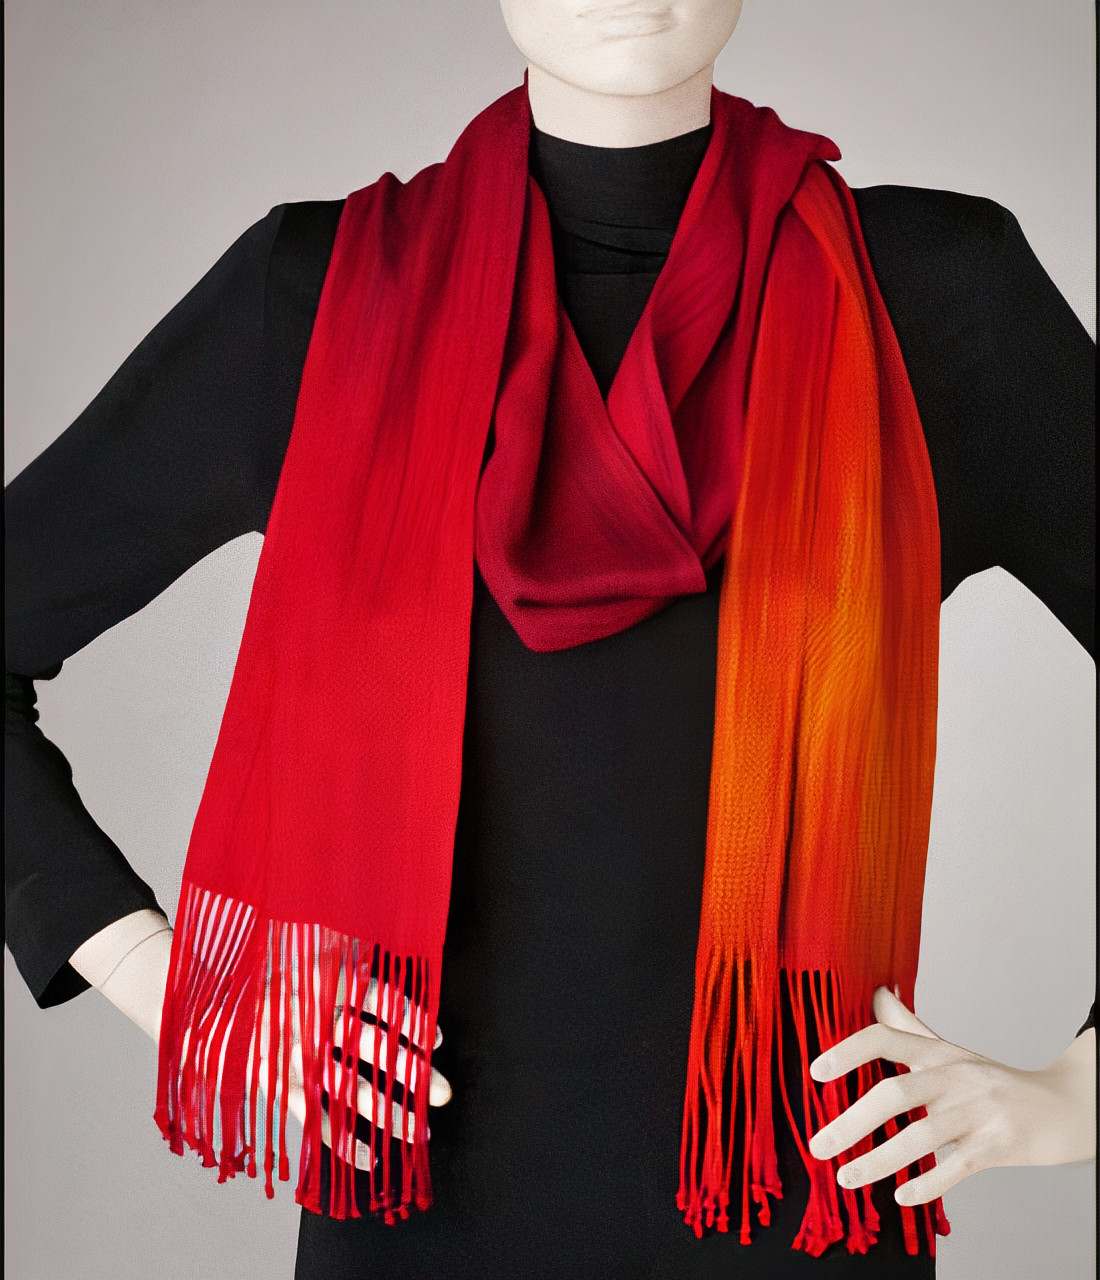 Painted Scarf with sunrise colors by Ruch